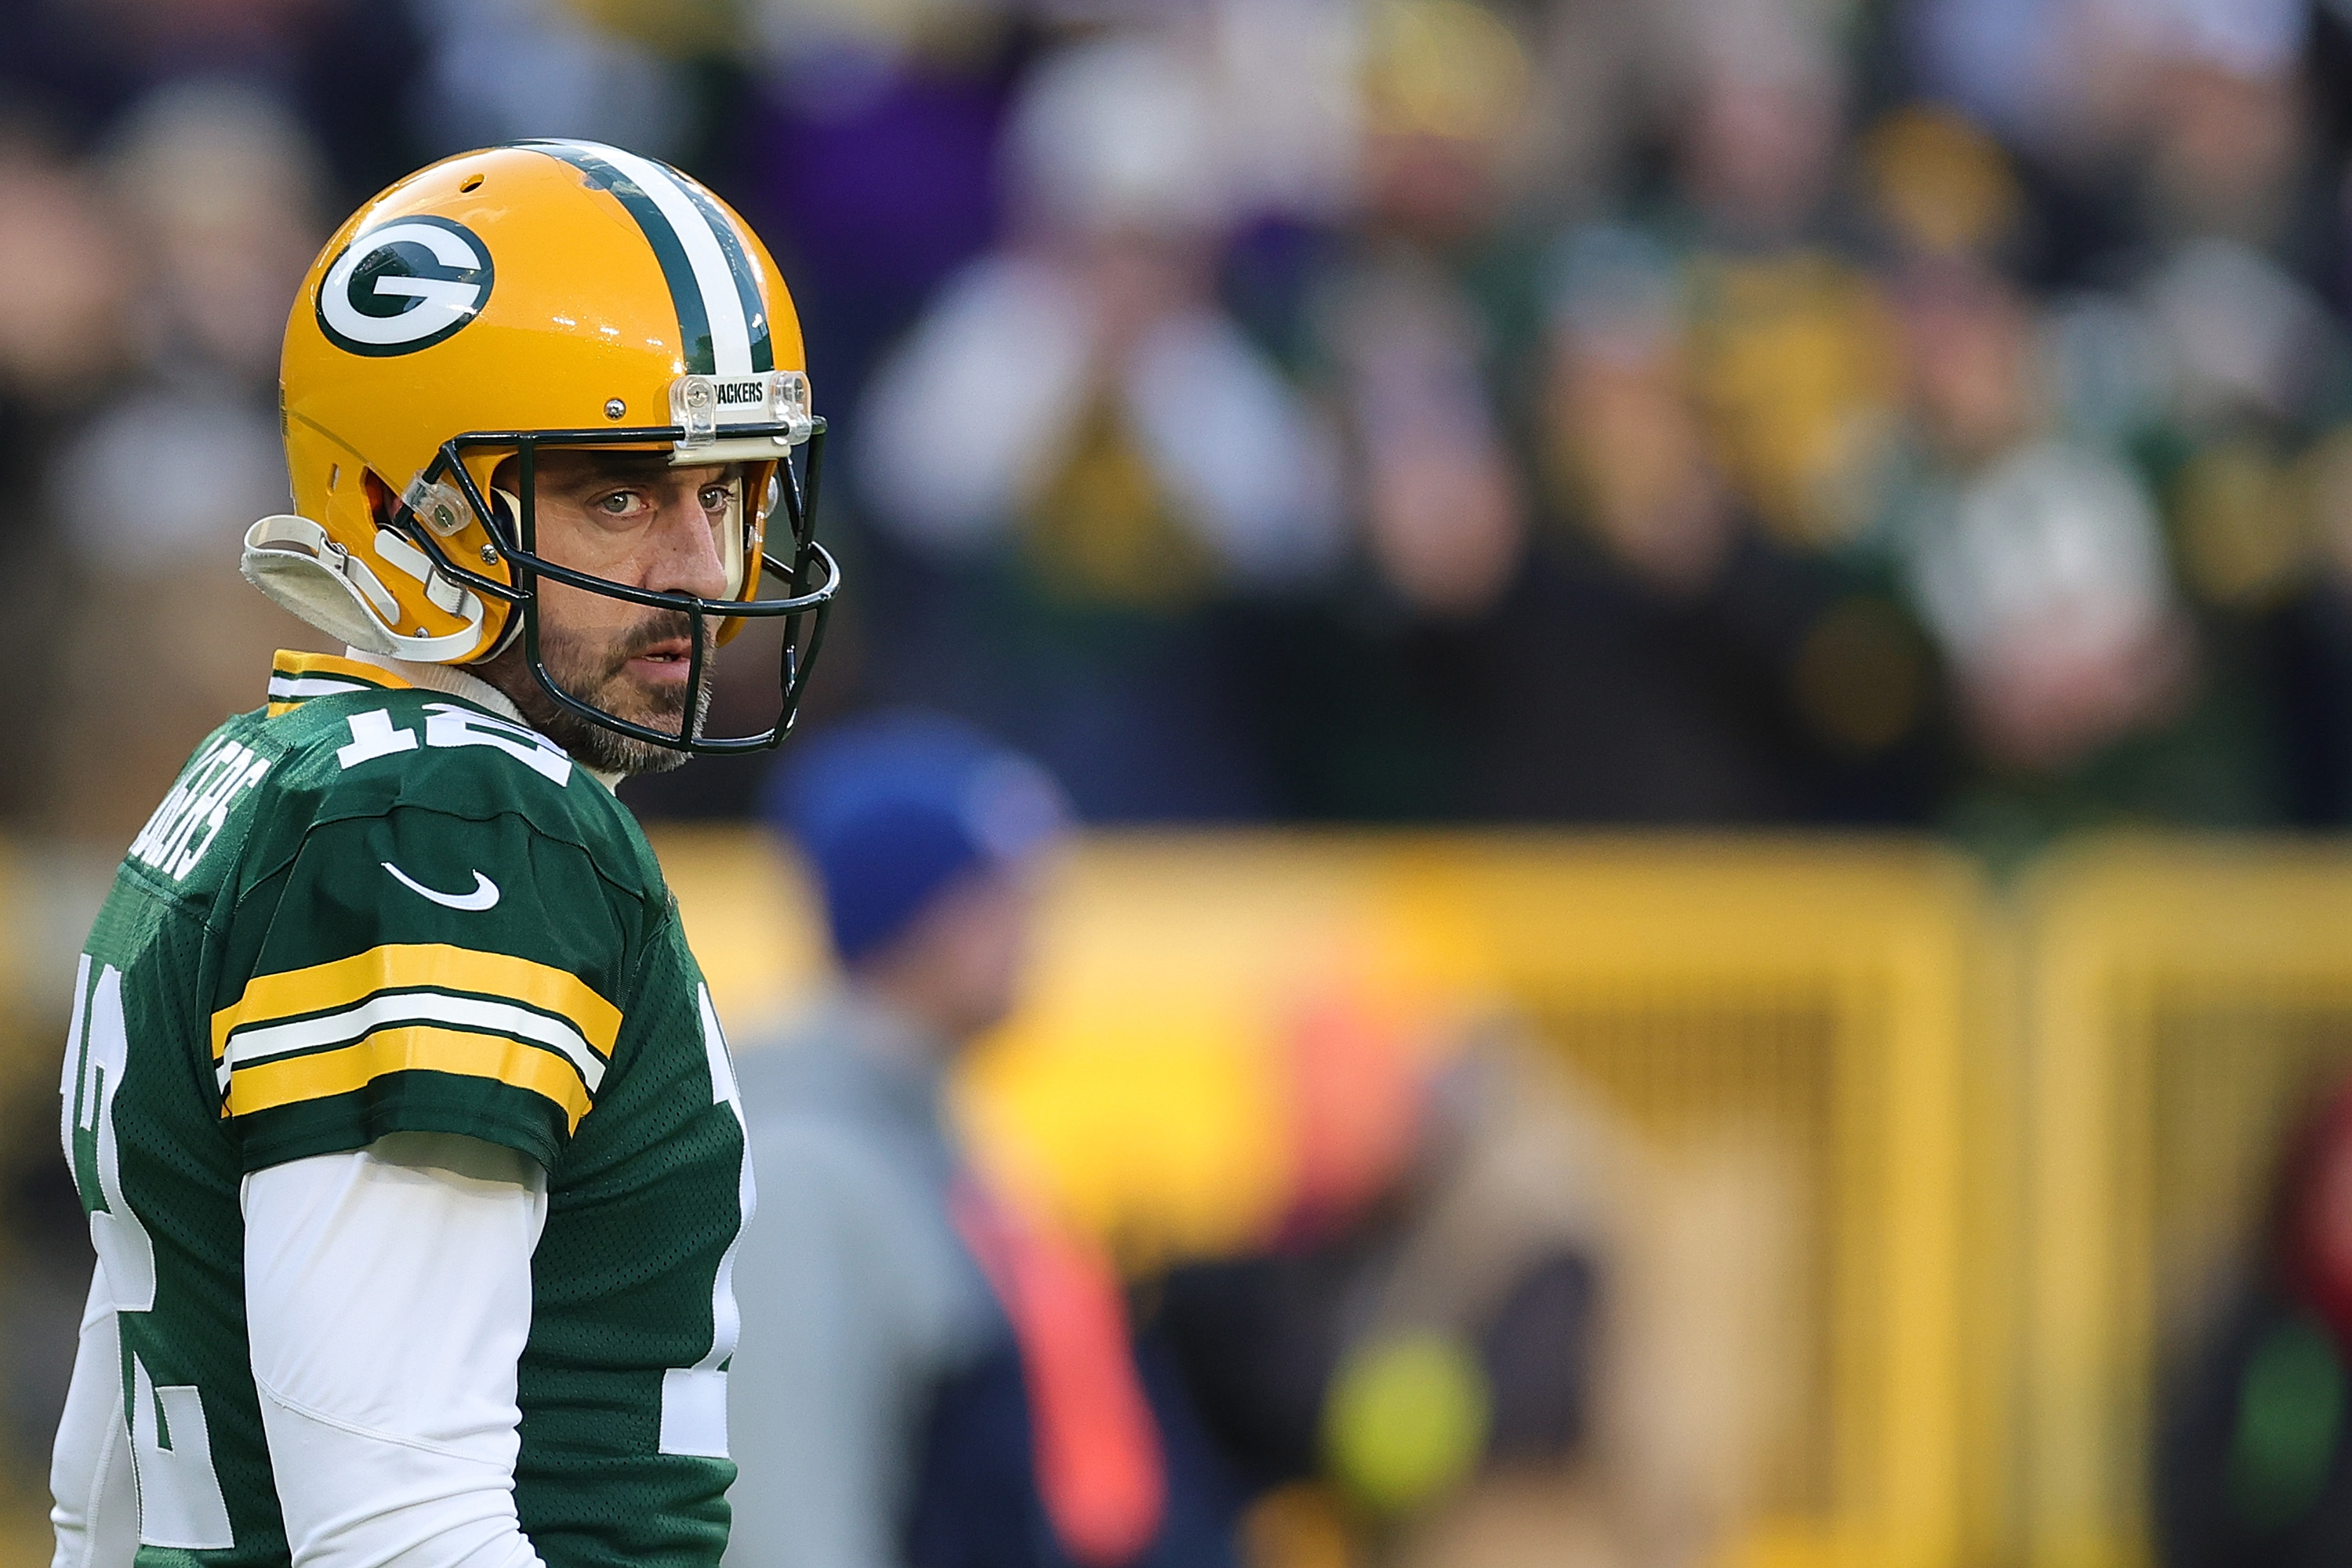 Aaron Rodgers of the Green Bay Packers waits for a timeout during a game against the Minnesota Vikings.